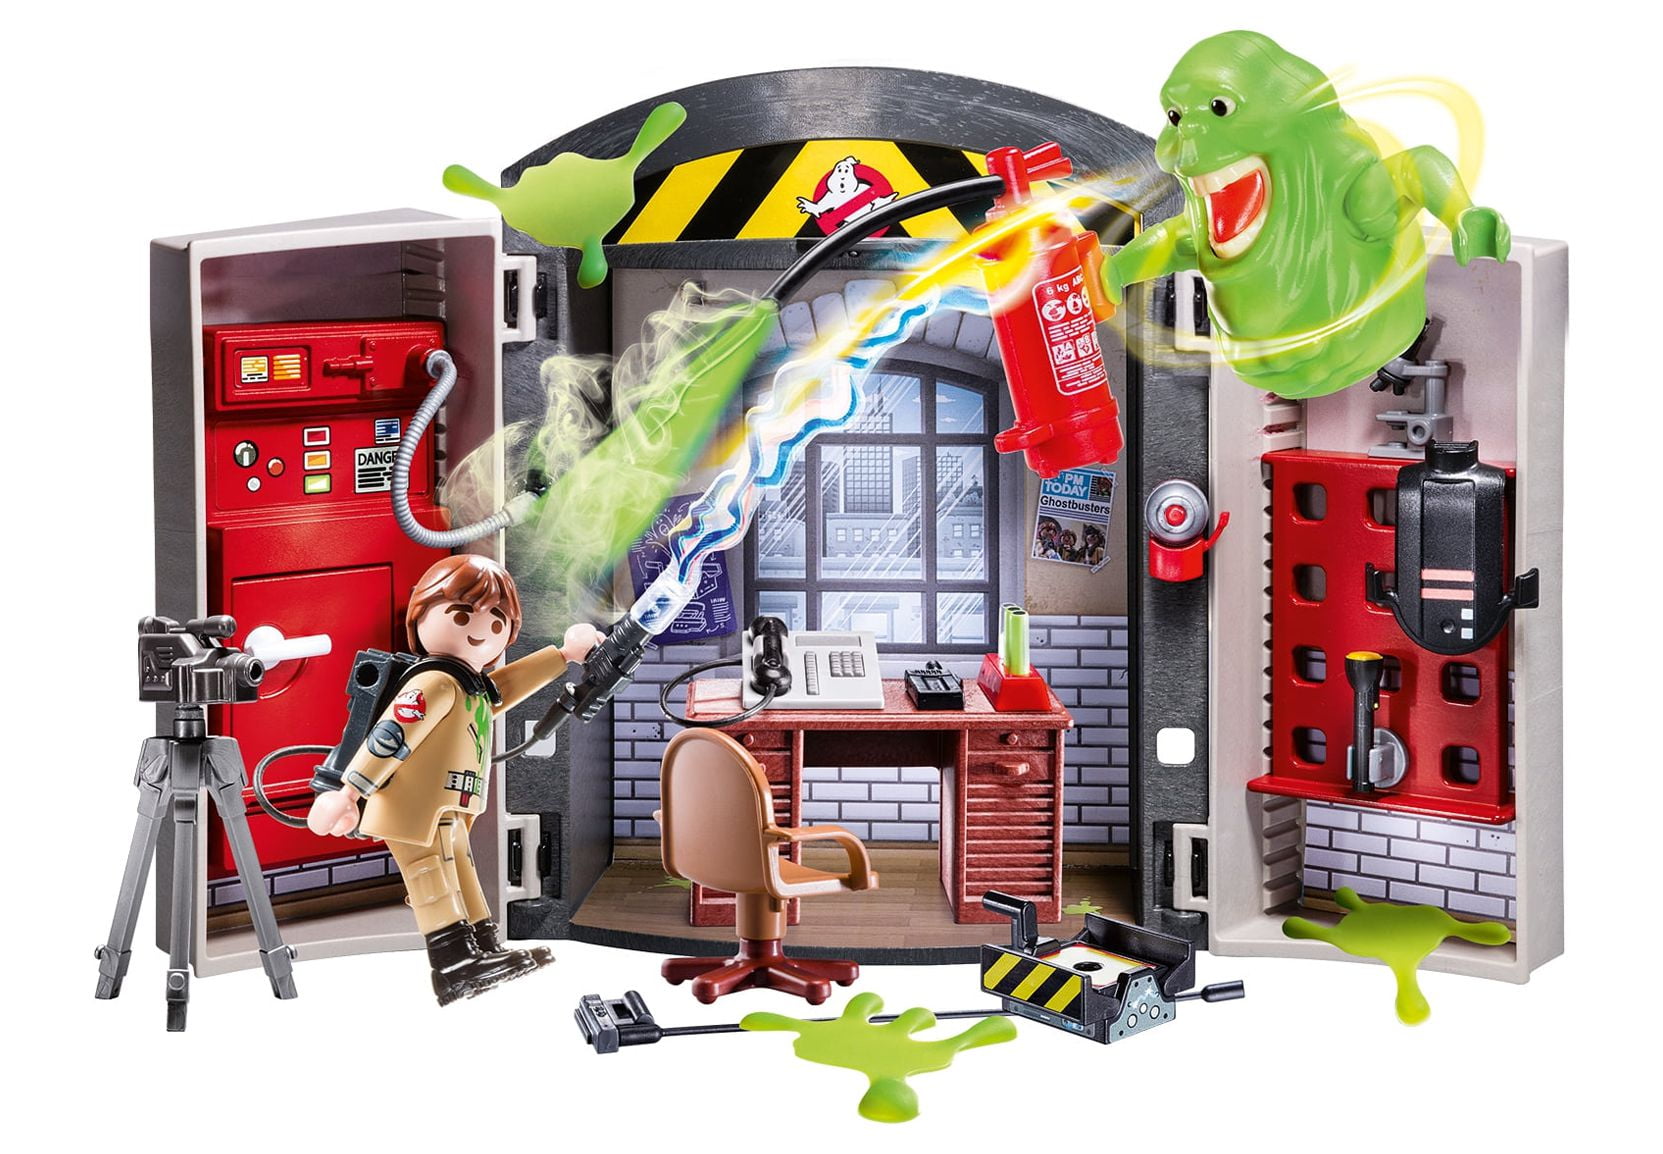 Incredible Playmobil Ghostbusters Gozer's Temple custom playset! -  Ghostbusters News